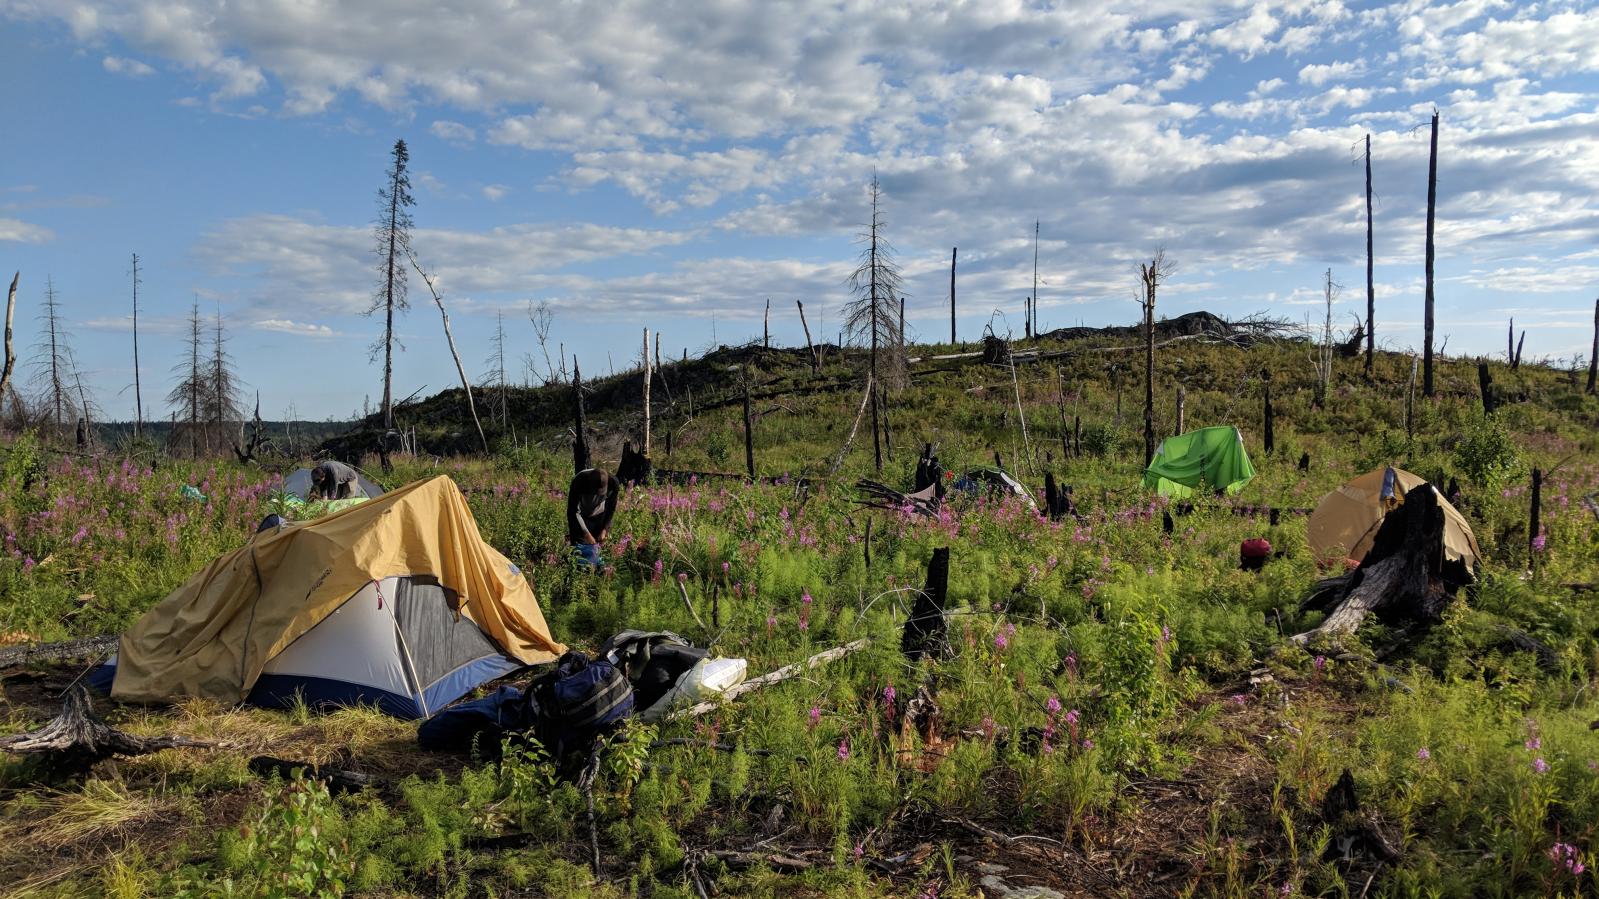 Pup Tents at the site of the 2018 Exploration Camp at the Olson Gold Project in Northern Saskatchewan